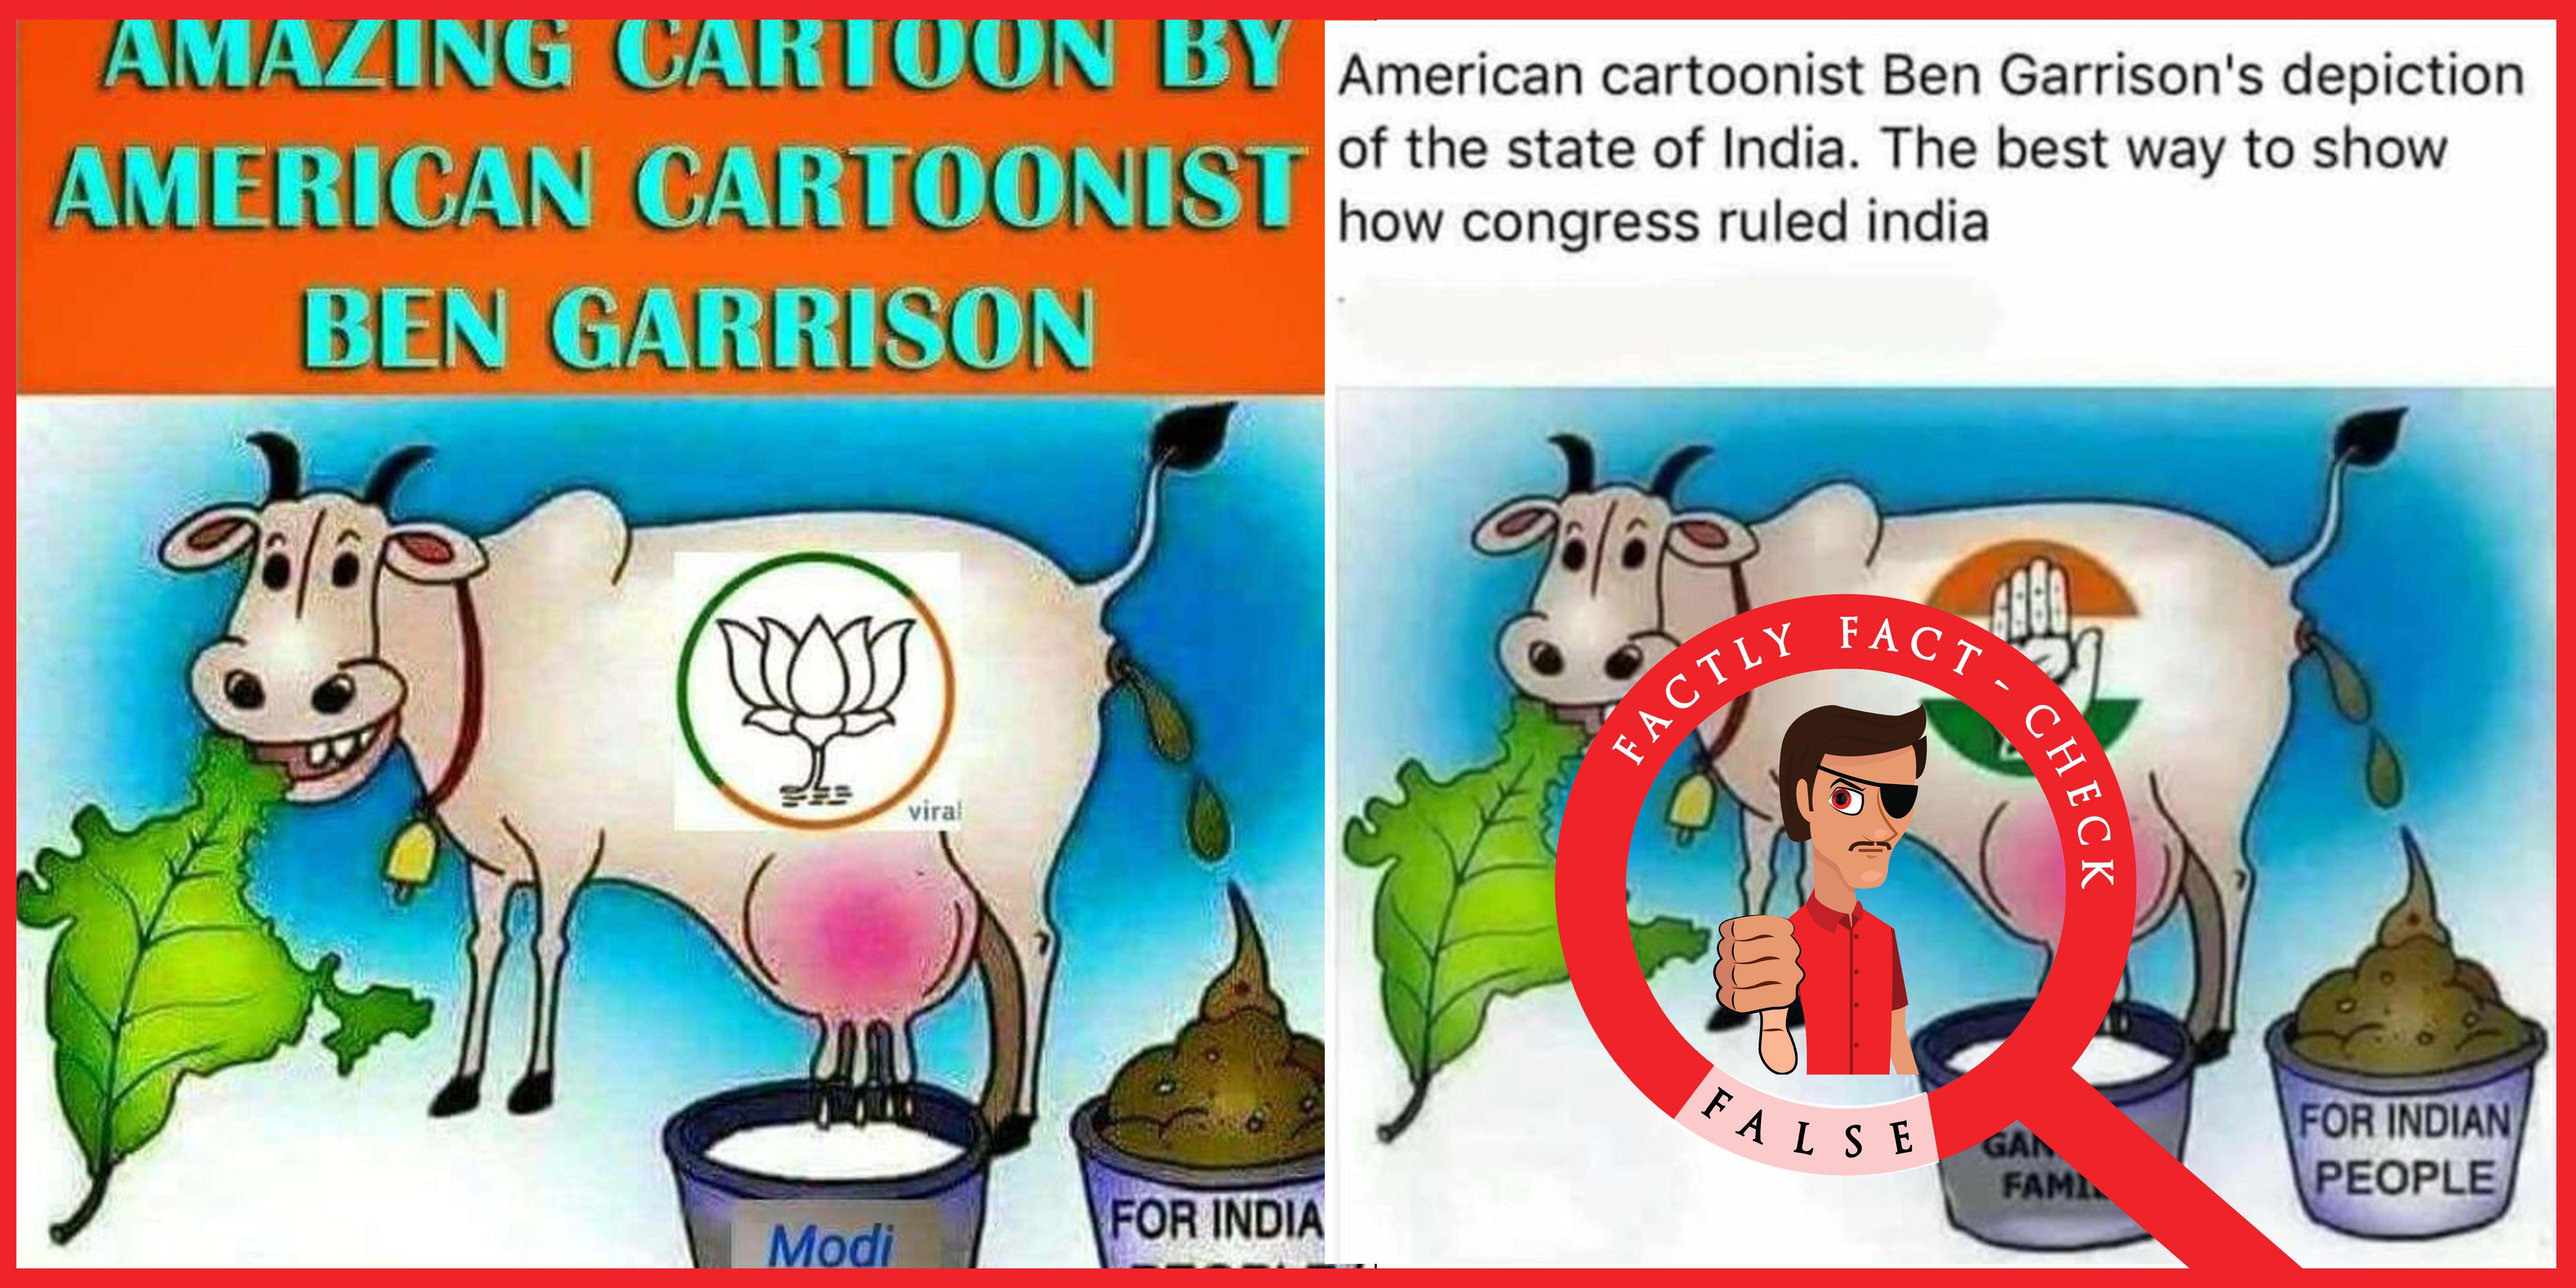 Political caricature criticizing the Congress isn't by the American Cartoonist  Ben Garrison - FACTLY